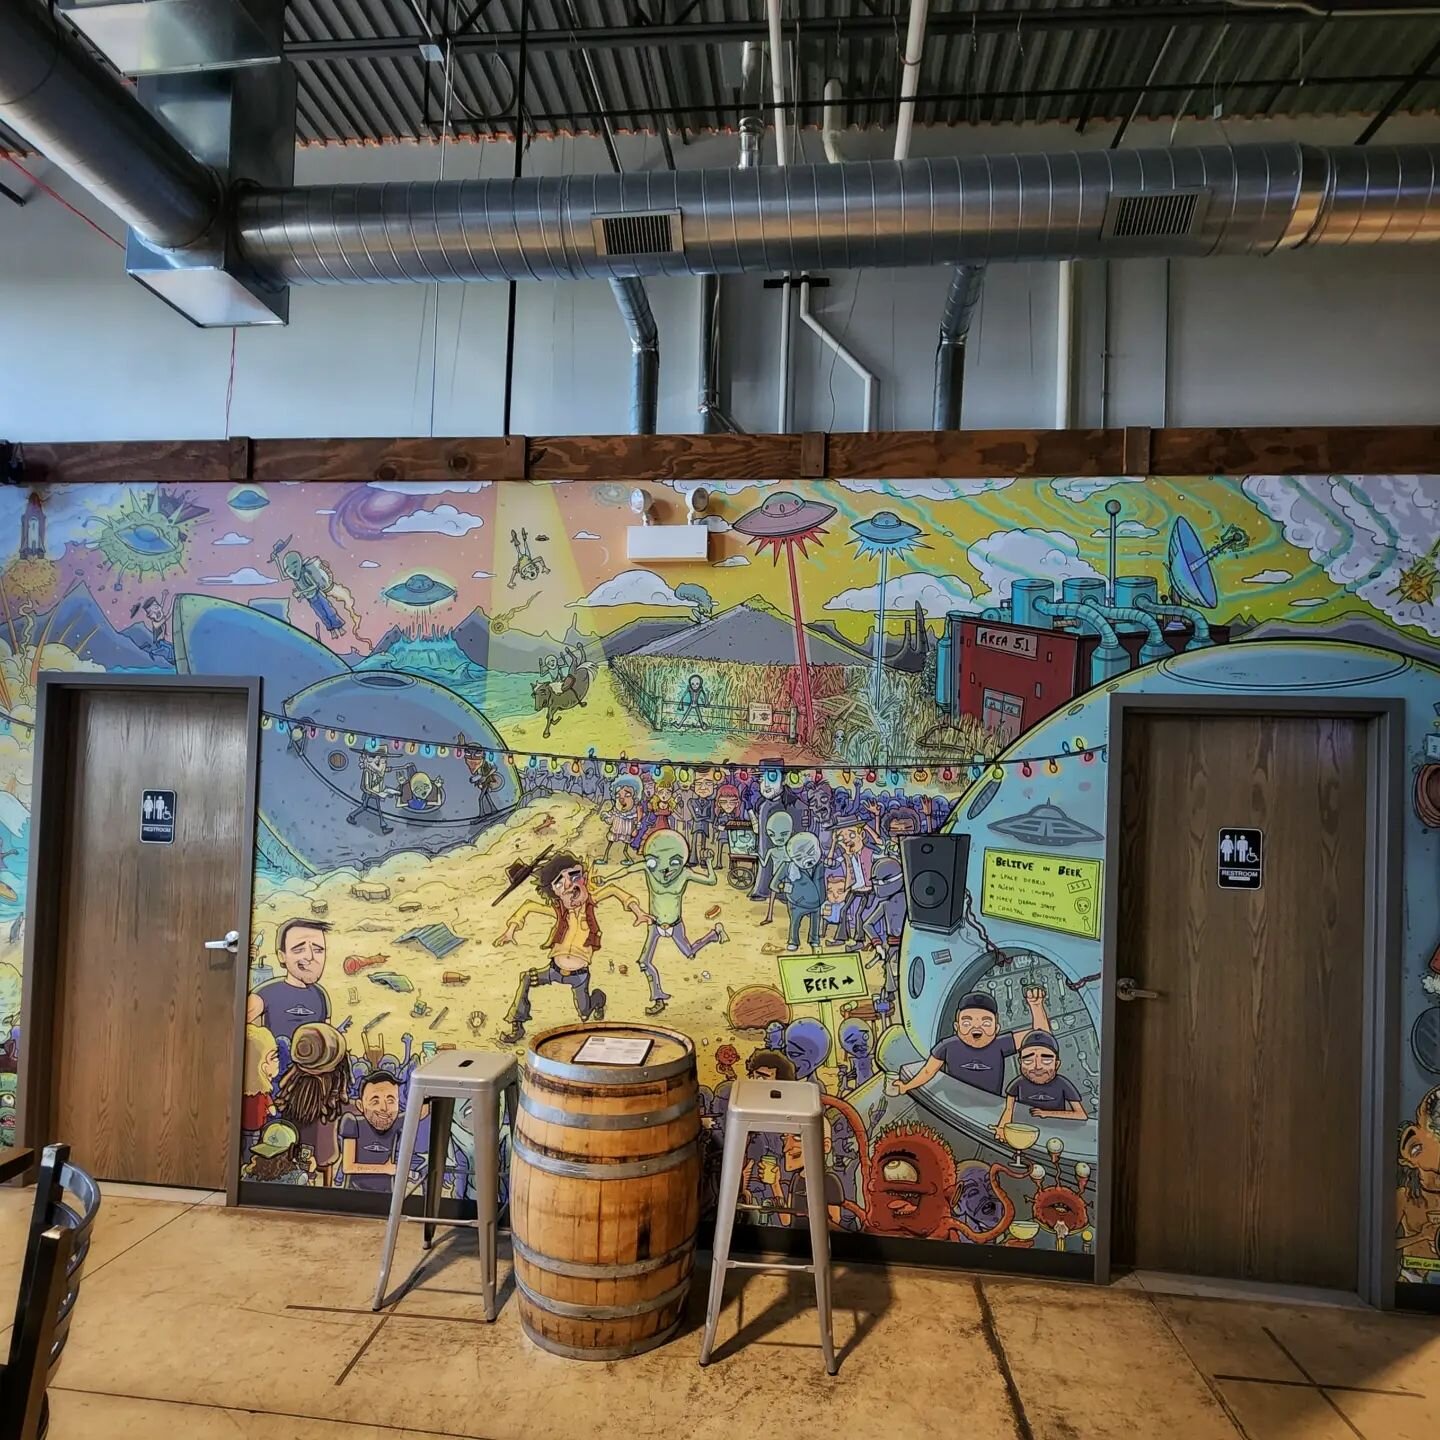 Own a brewery? Want to add some flare to the wall? We do full interior vinyl installs!

Already have an artist? Great. Need one? We can help! We provide graphic art services if you need them. 

#freedomdecalsinc
#interiorartdesign
#vinylinstallation 